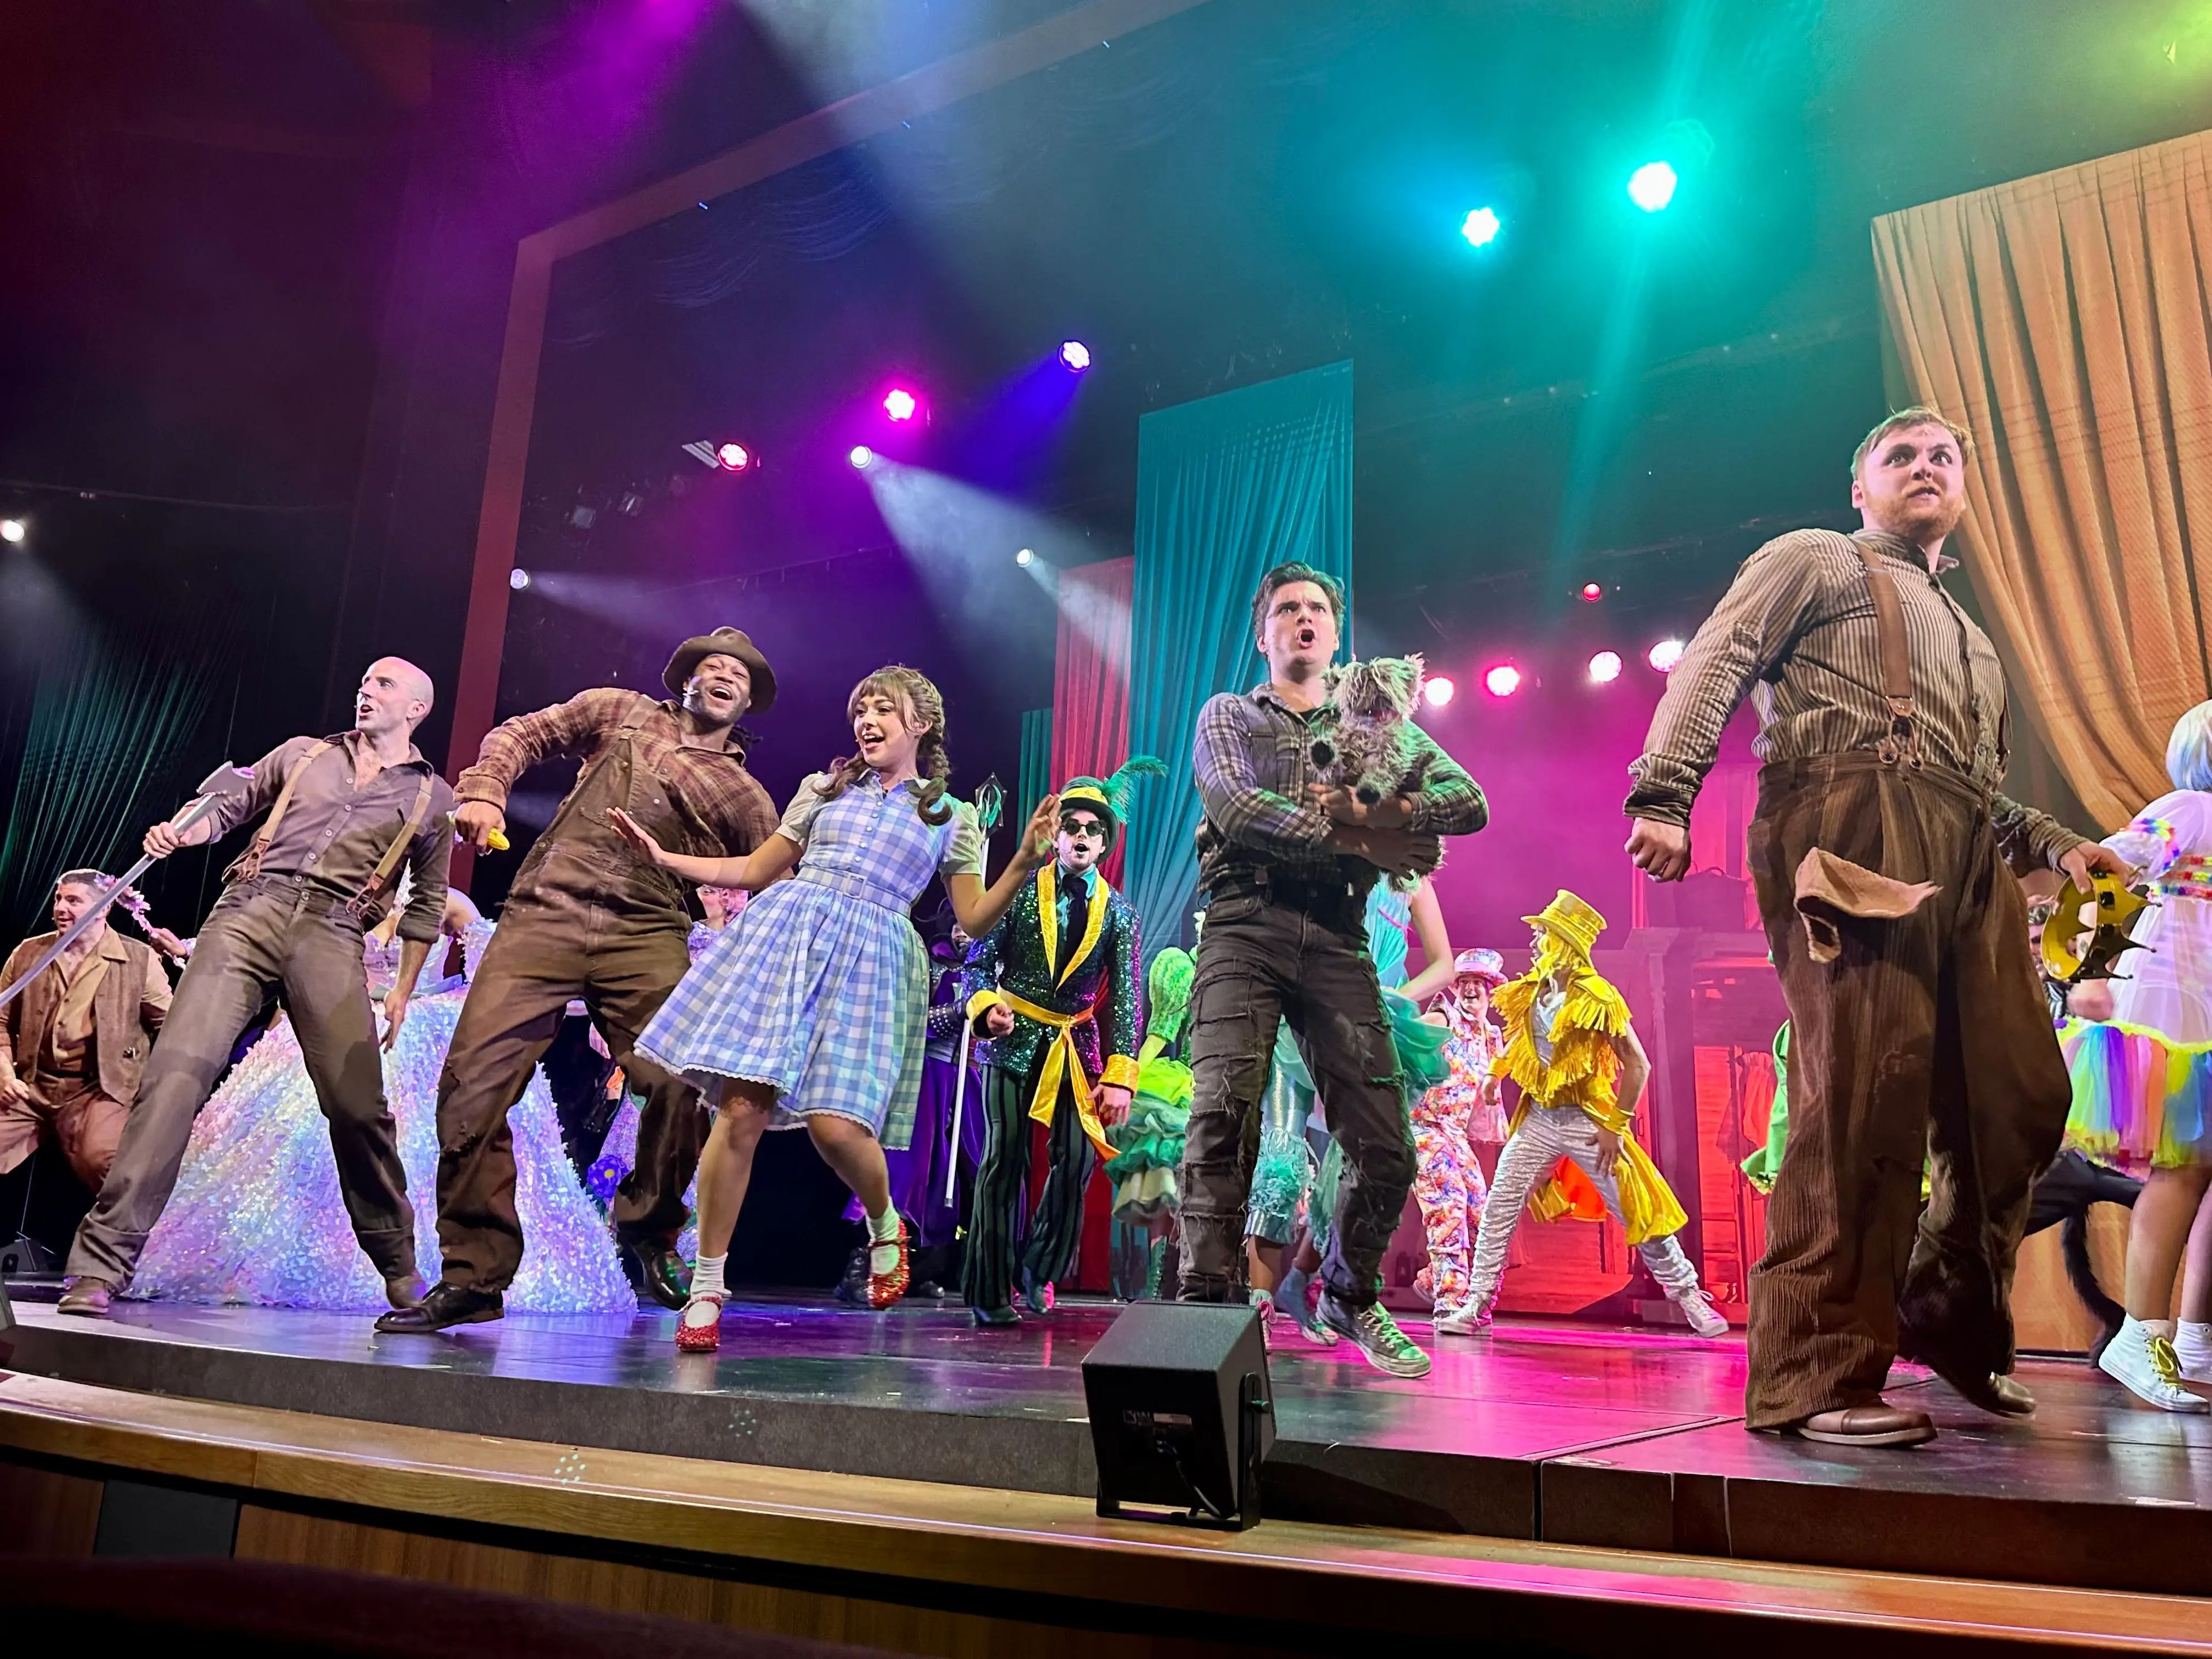 Performers in "Wizard of Oz" costumes performing on stage.